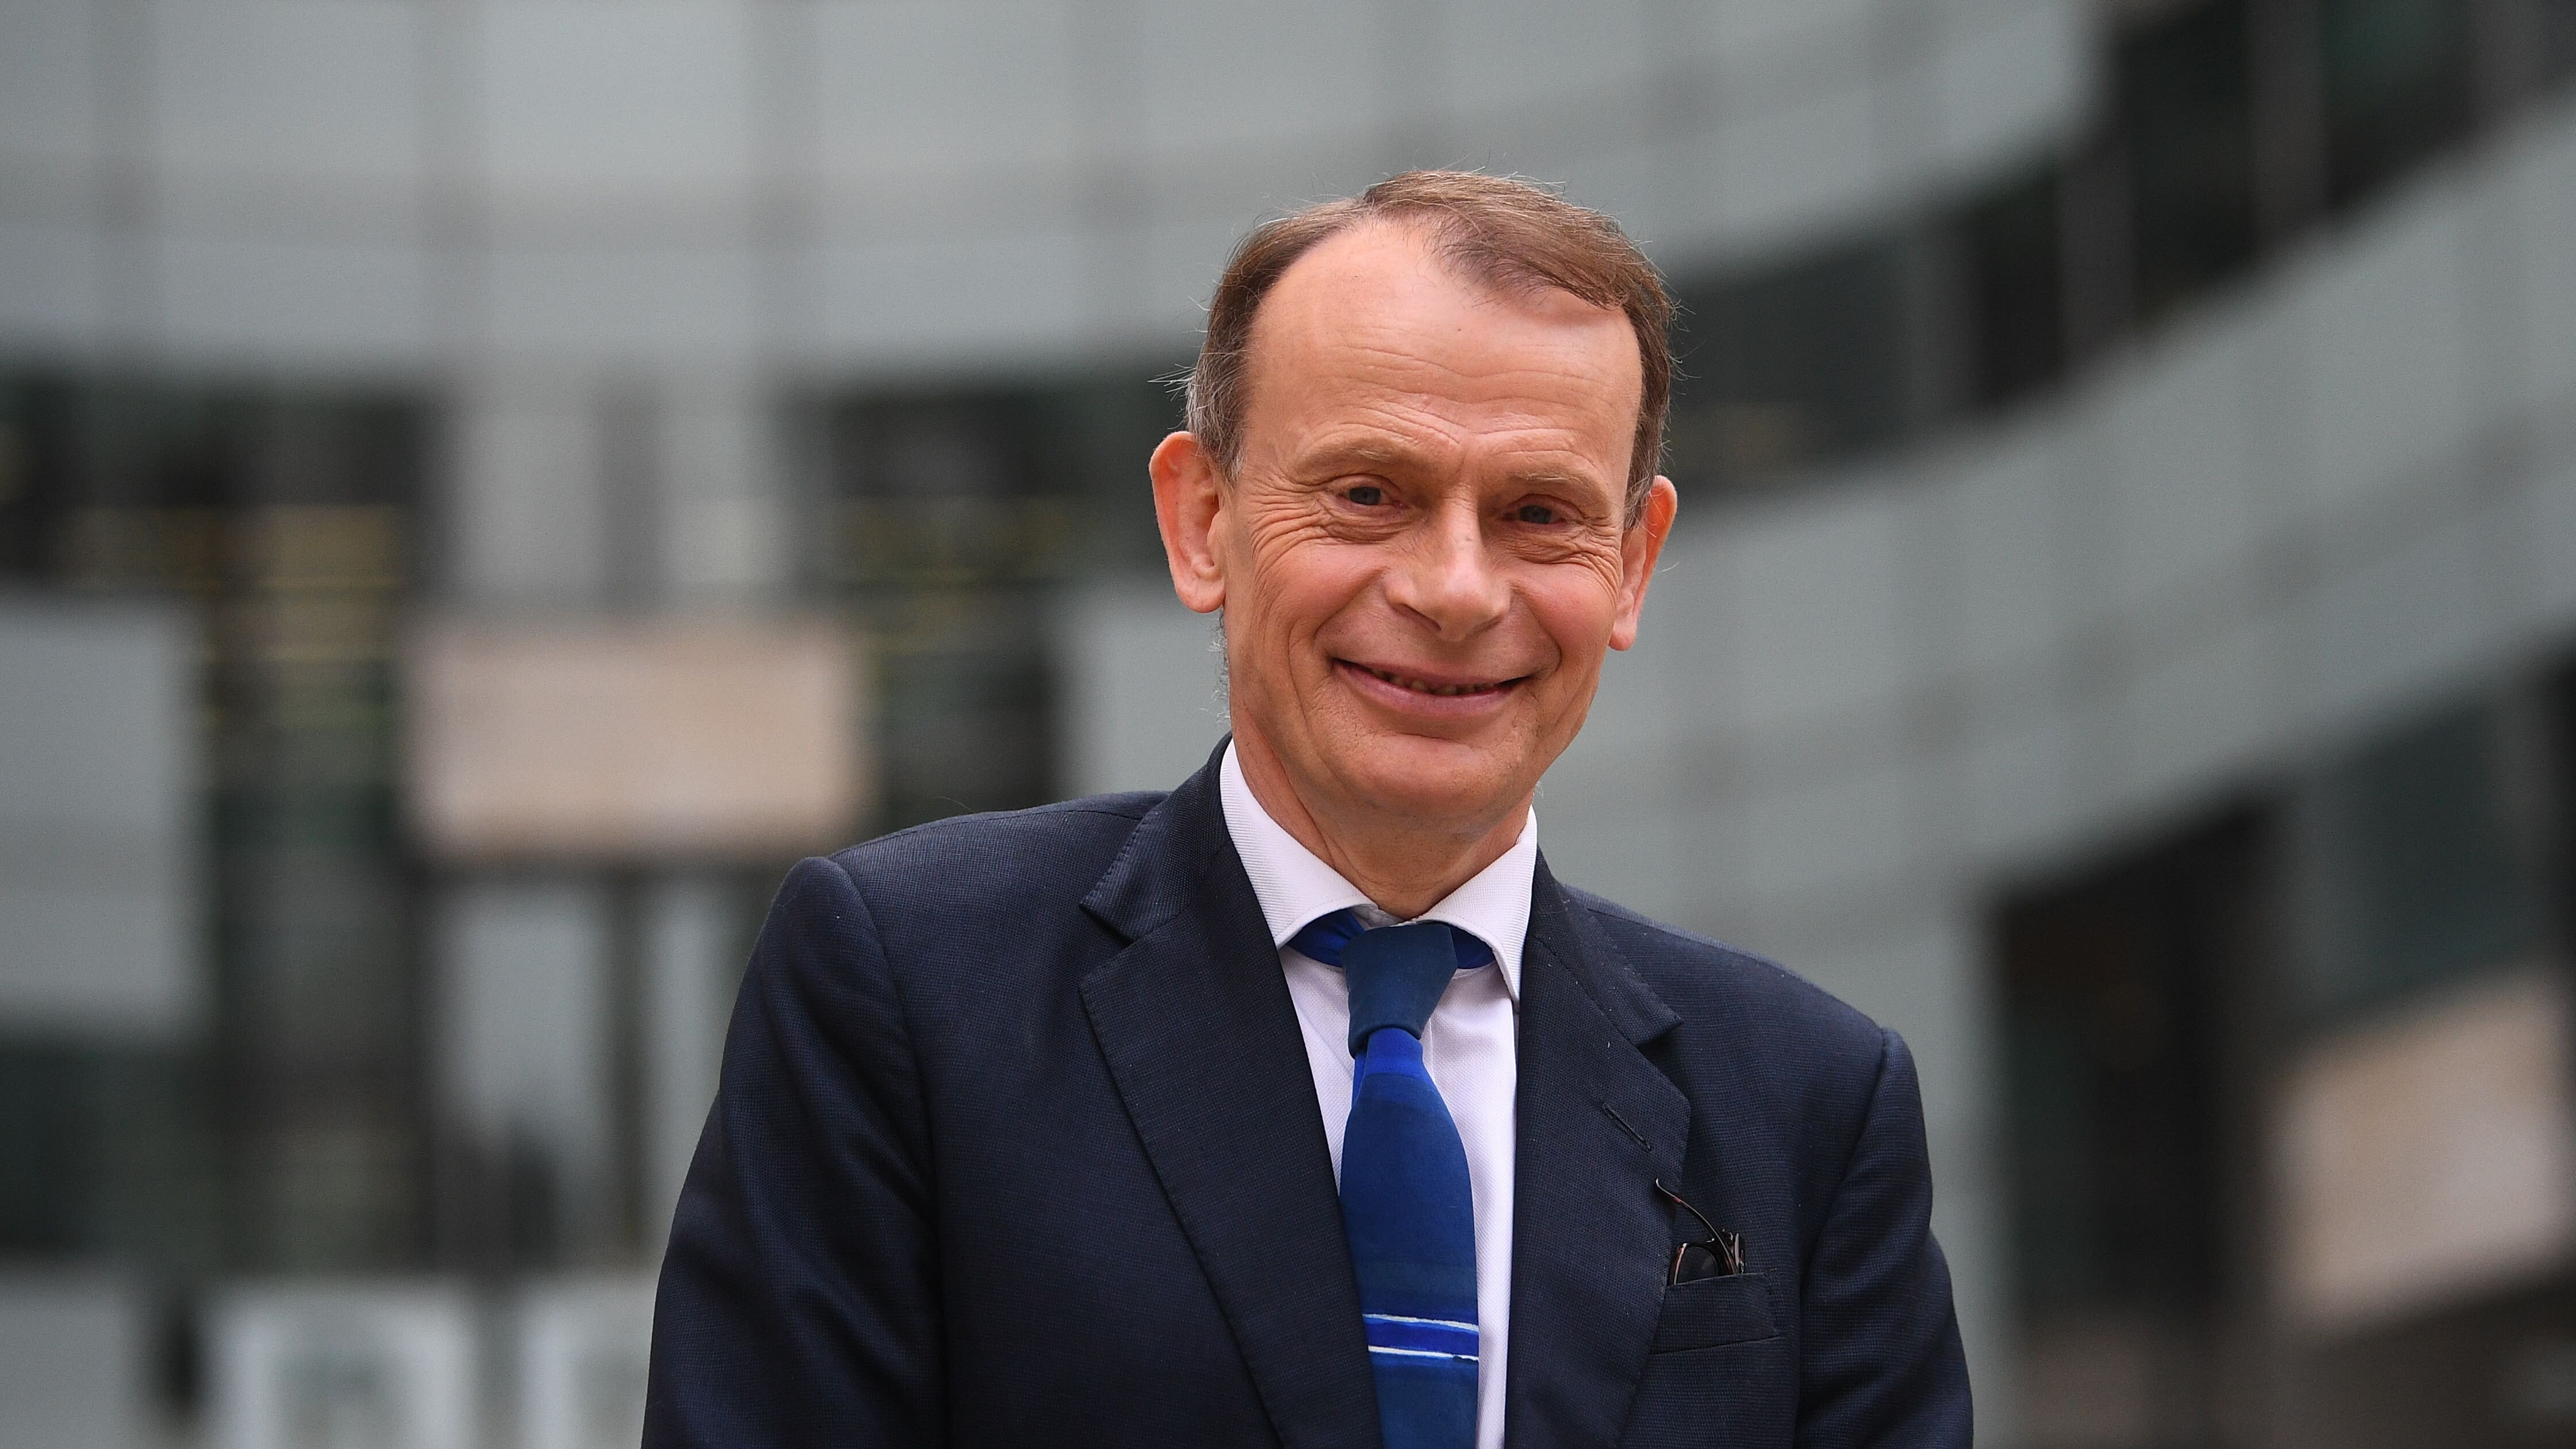 Marr said he was ‘pro-BBC’ but it has made ‘some very big mistakes’.